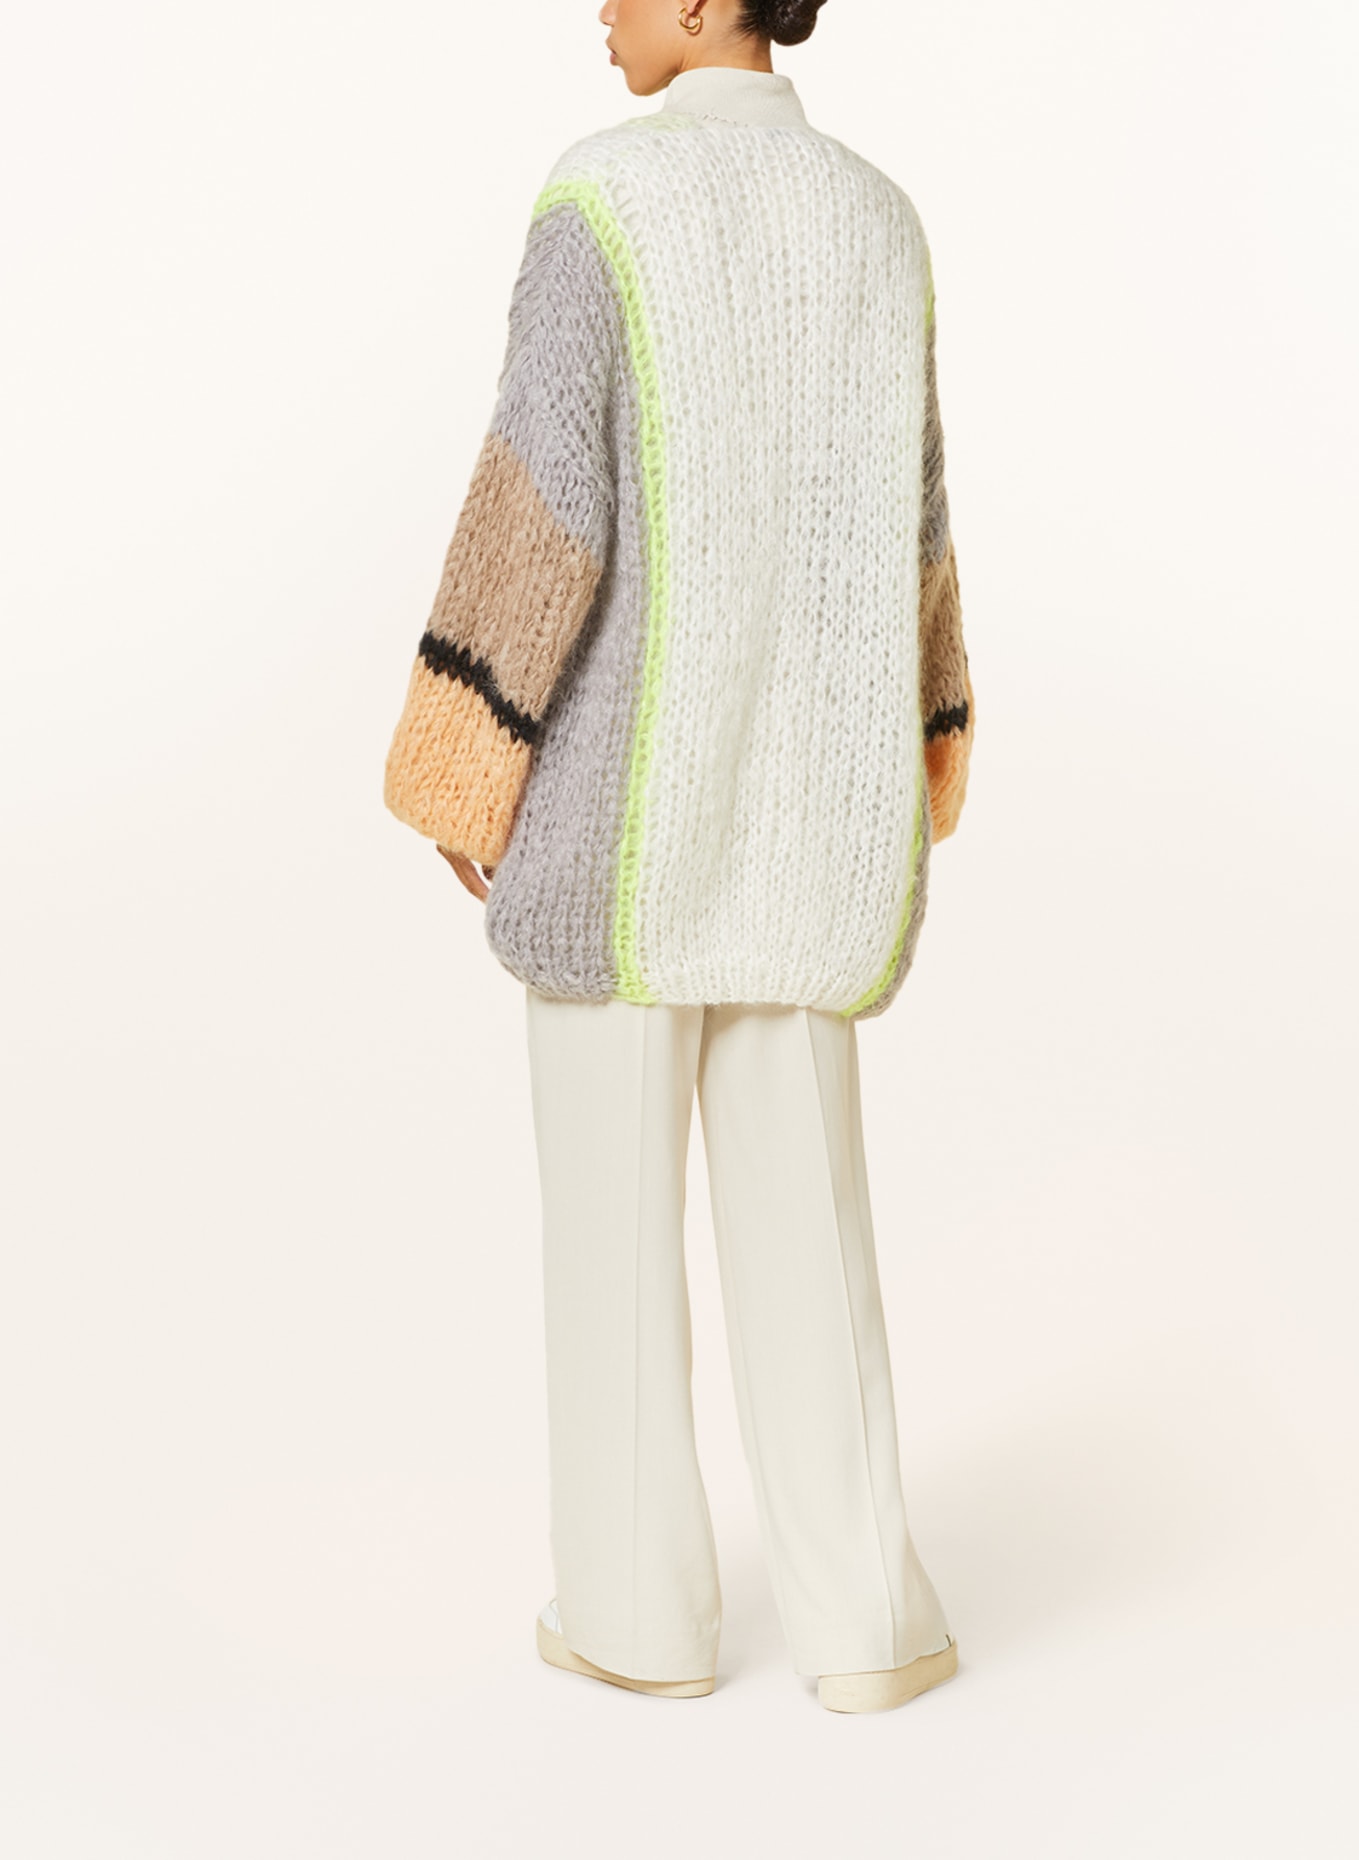 MAIAMI Knit cardigan made of mohair, Color: TAUPE/ WHITE/ NEON YELLOW (Image 3)